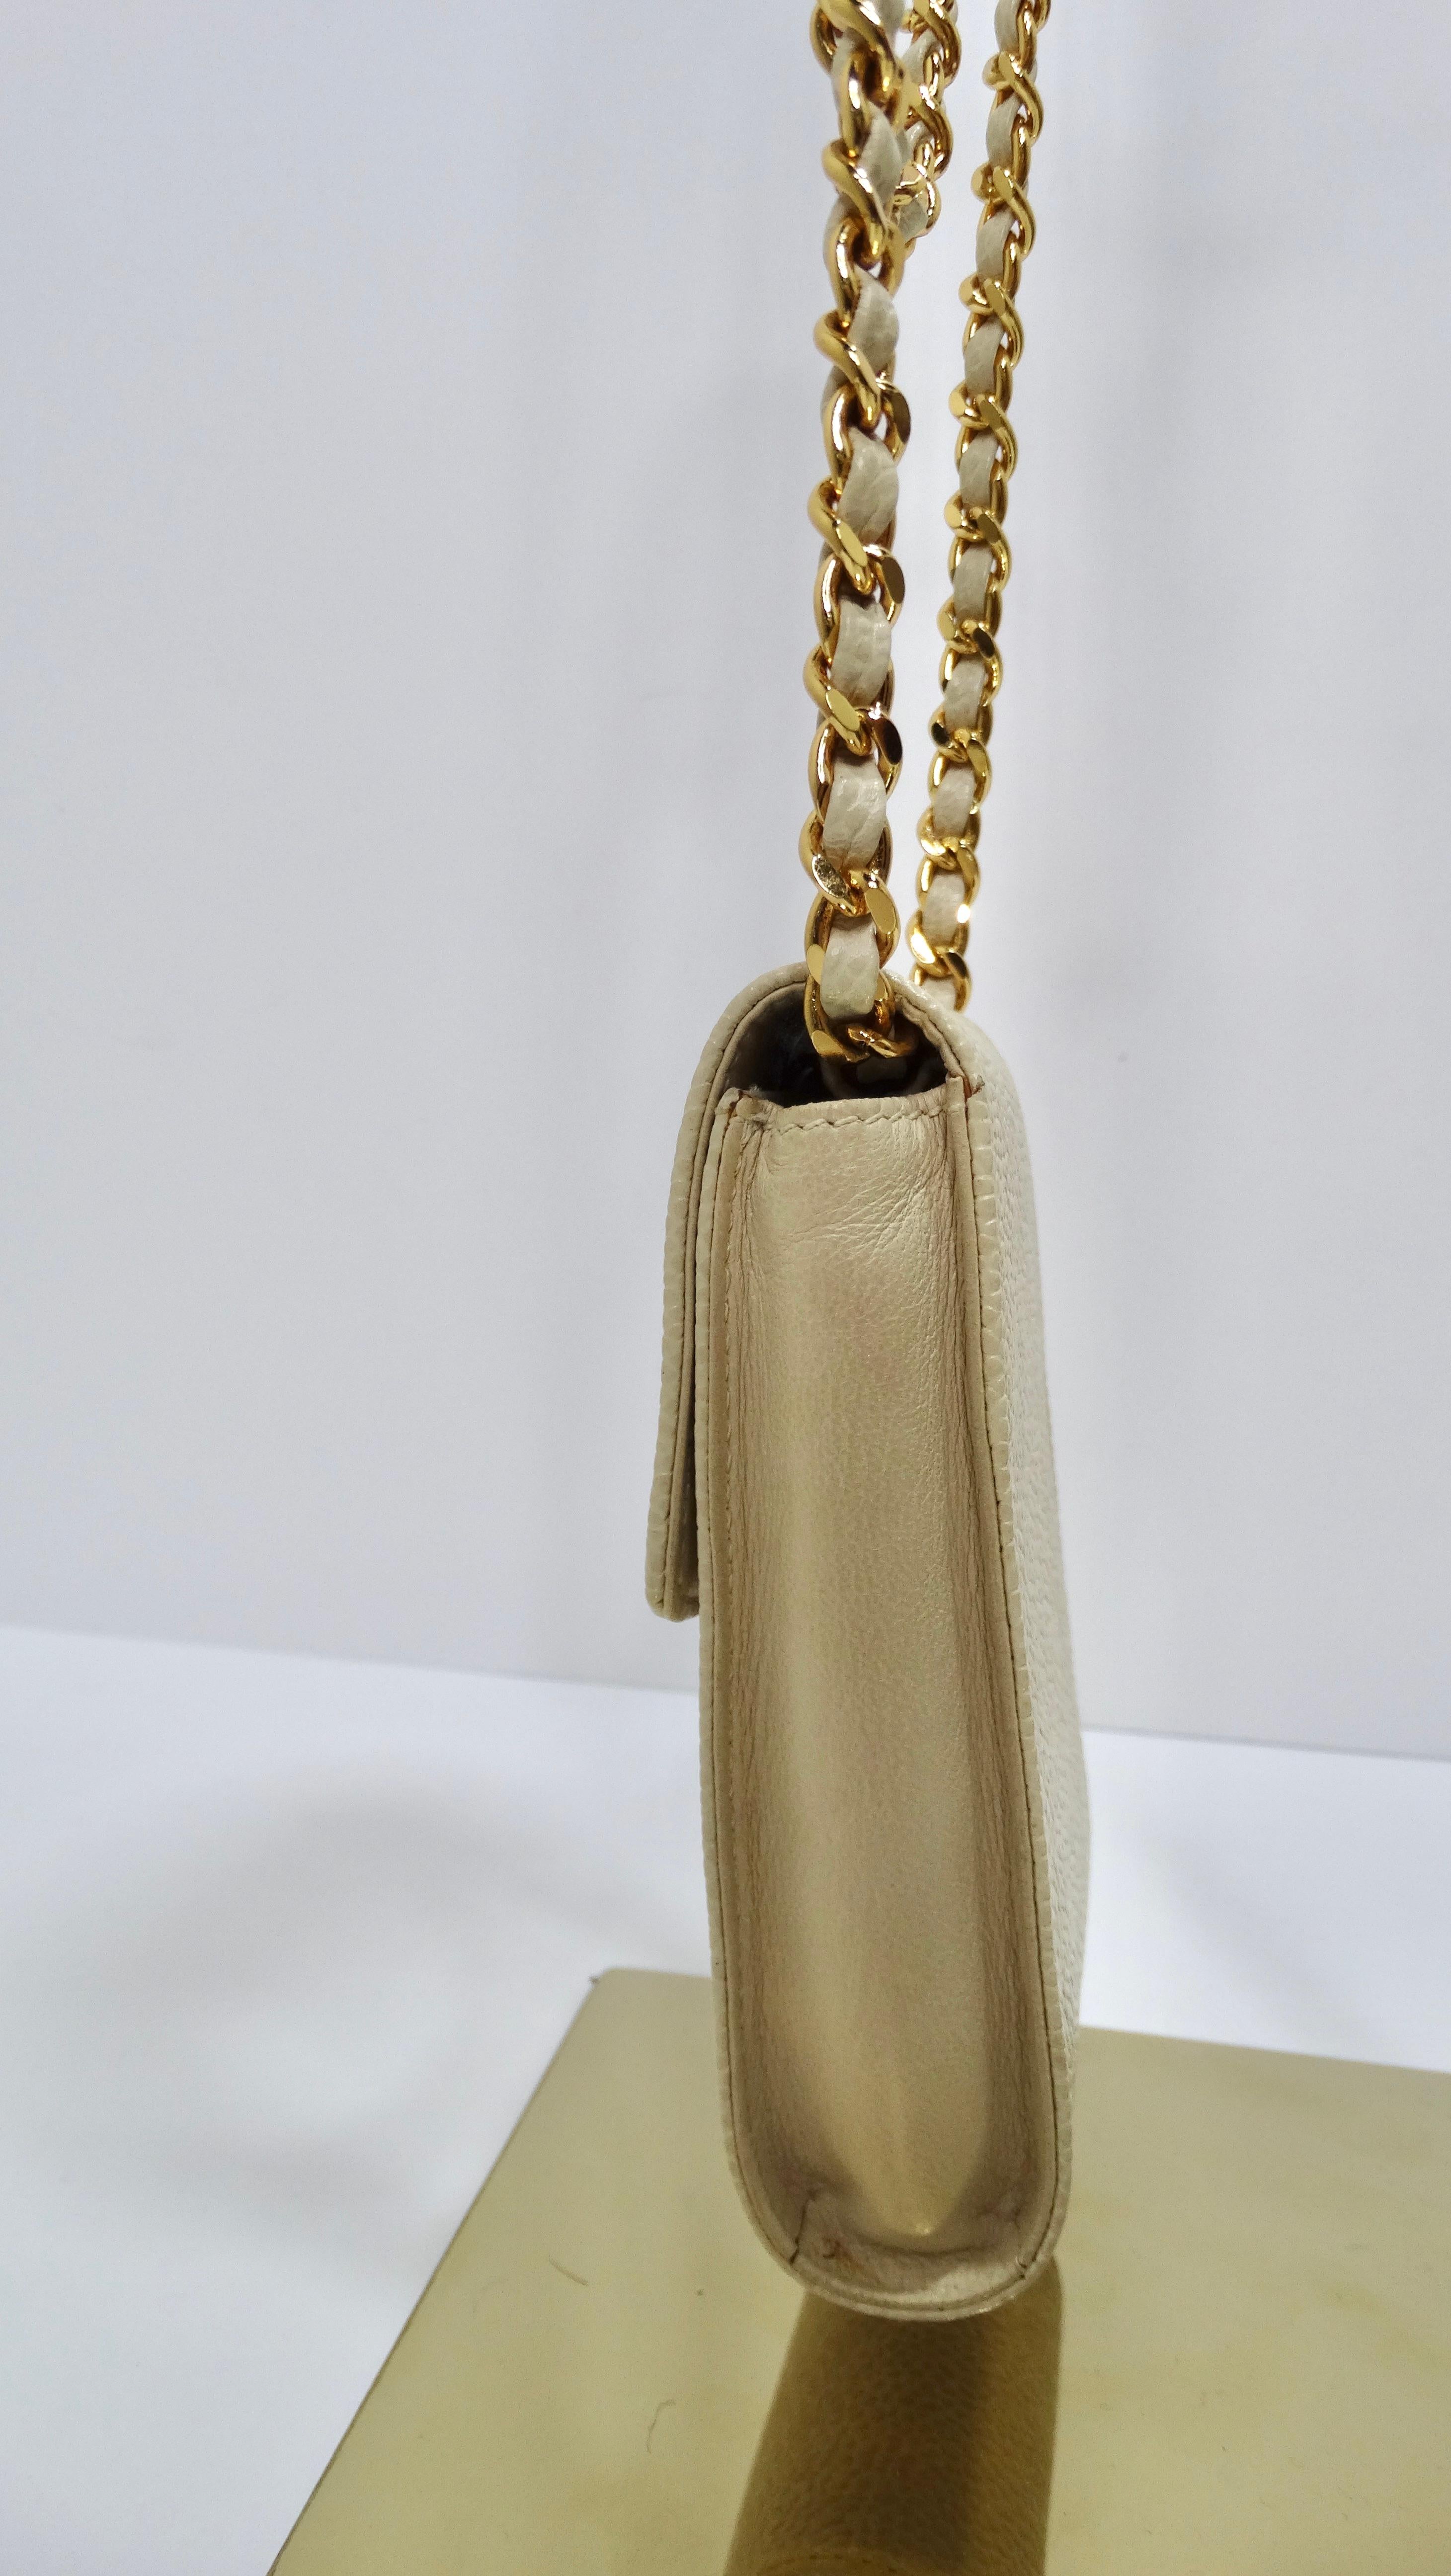 Chanel Vintage Cream Caviar Leather Chain Pouch In Good Condition For Sale In Scottsdale, AZ